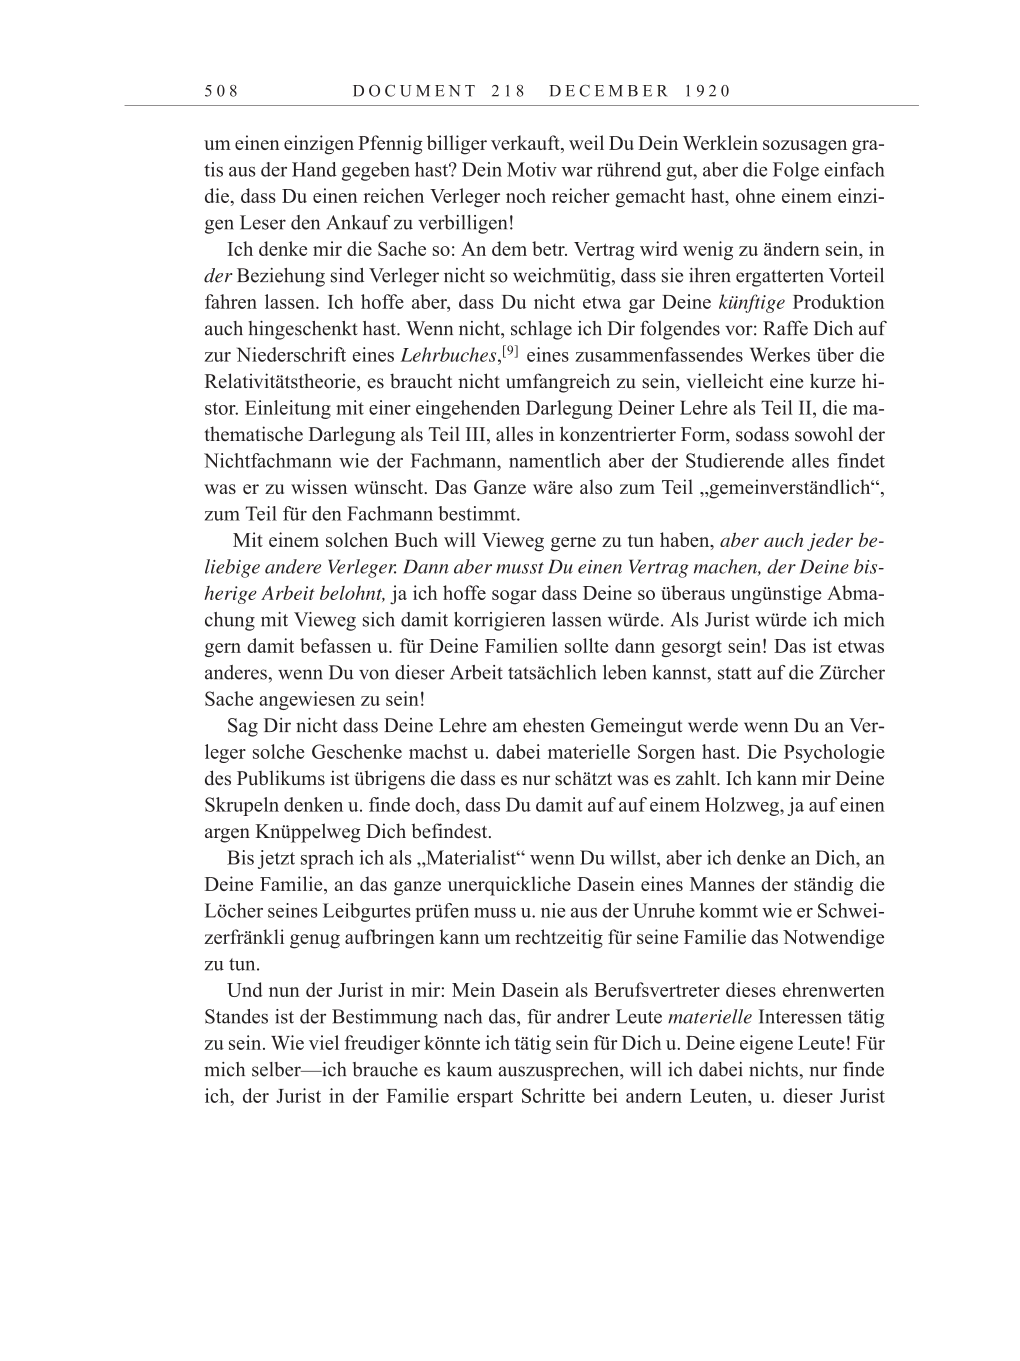 Volume 10: The Berlin Years: Correspondence May-December 1920 / Supplementary Correspondence 1909-1920 page 508